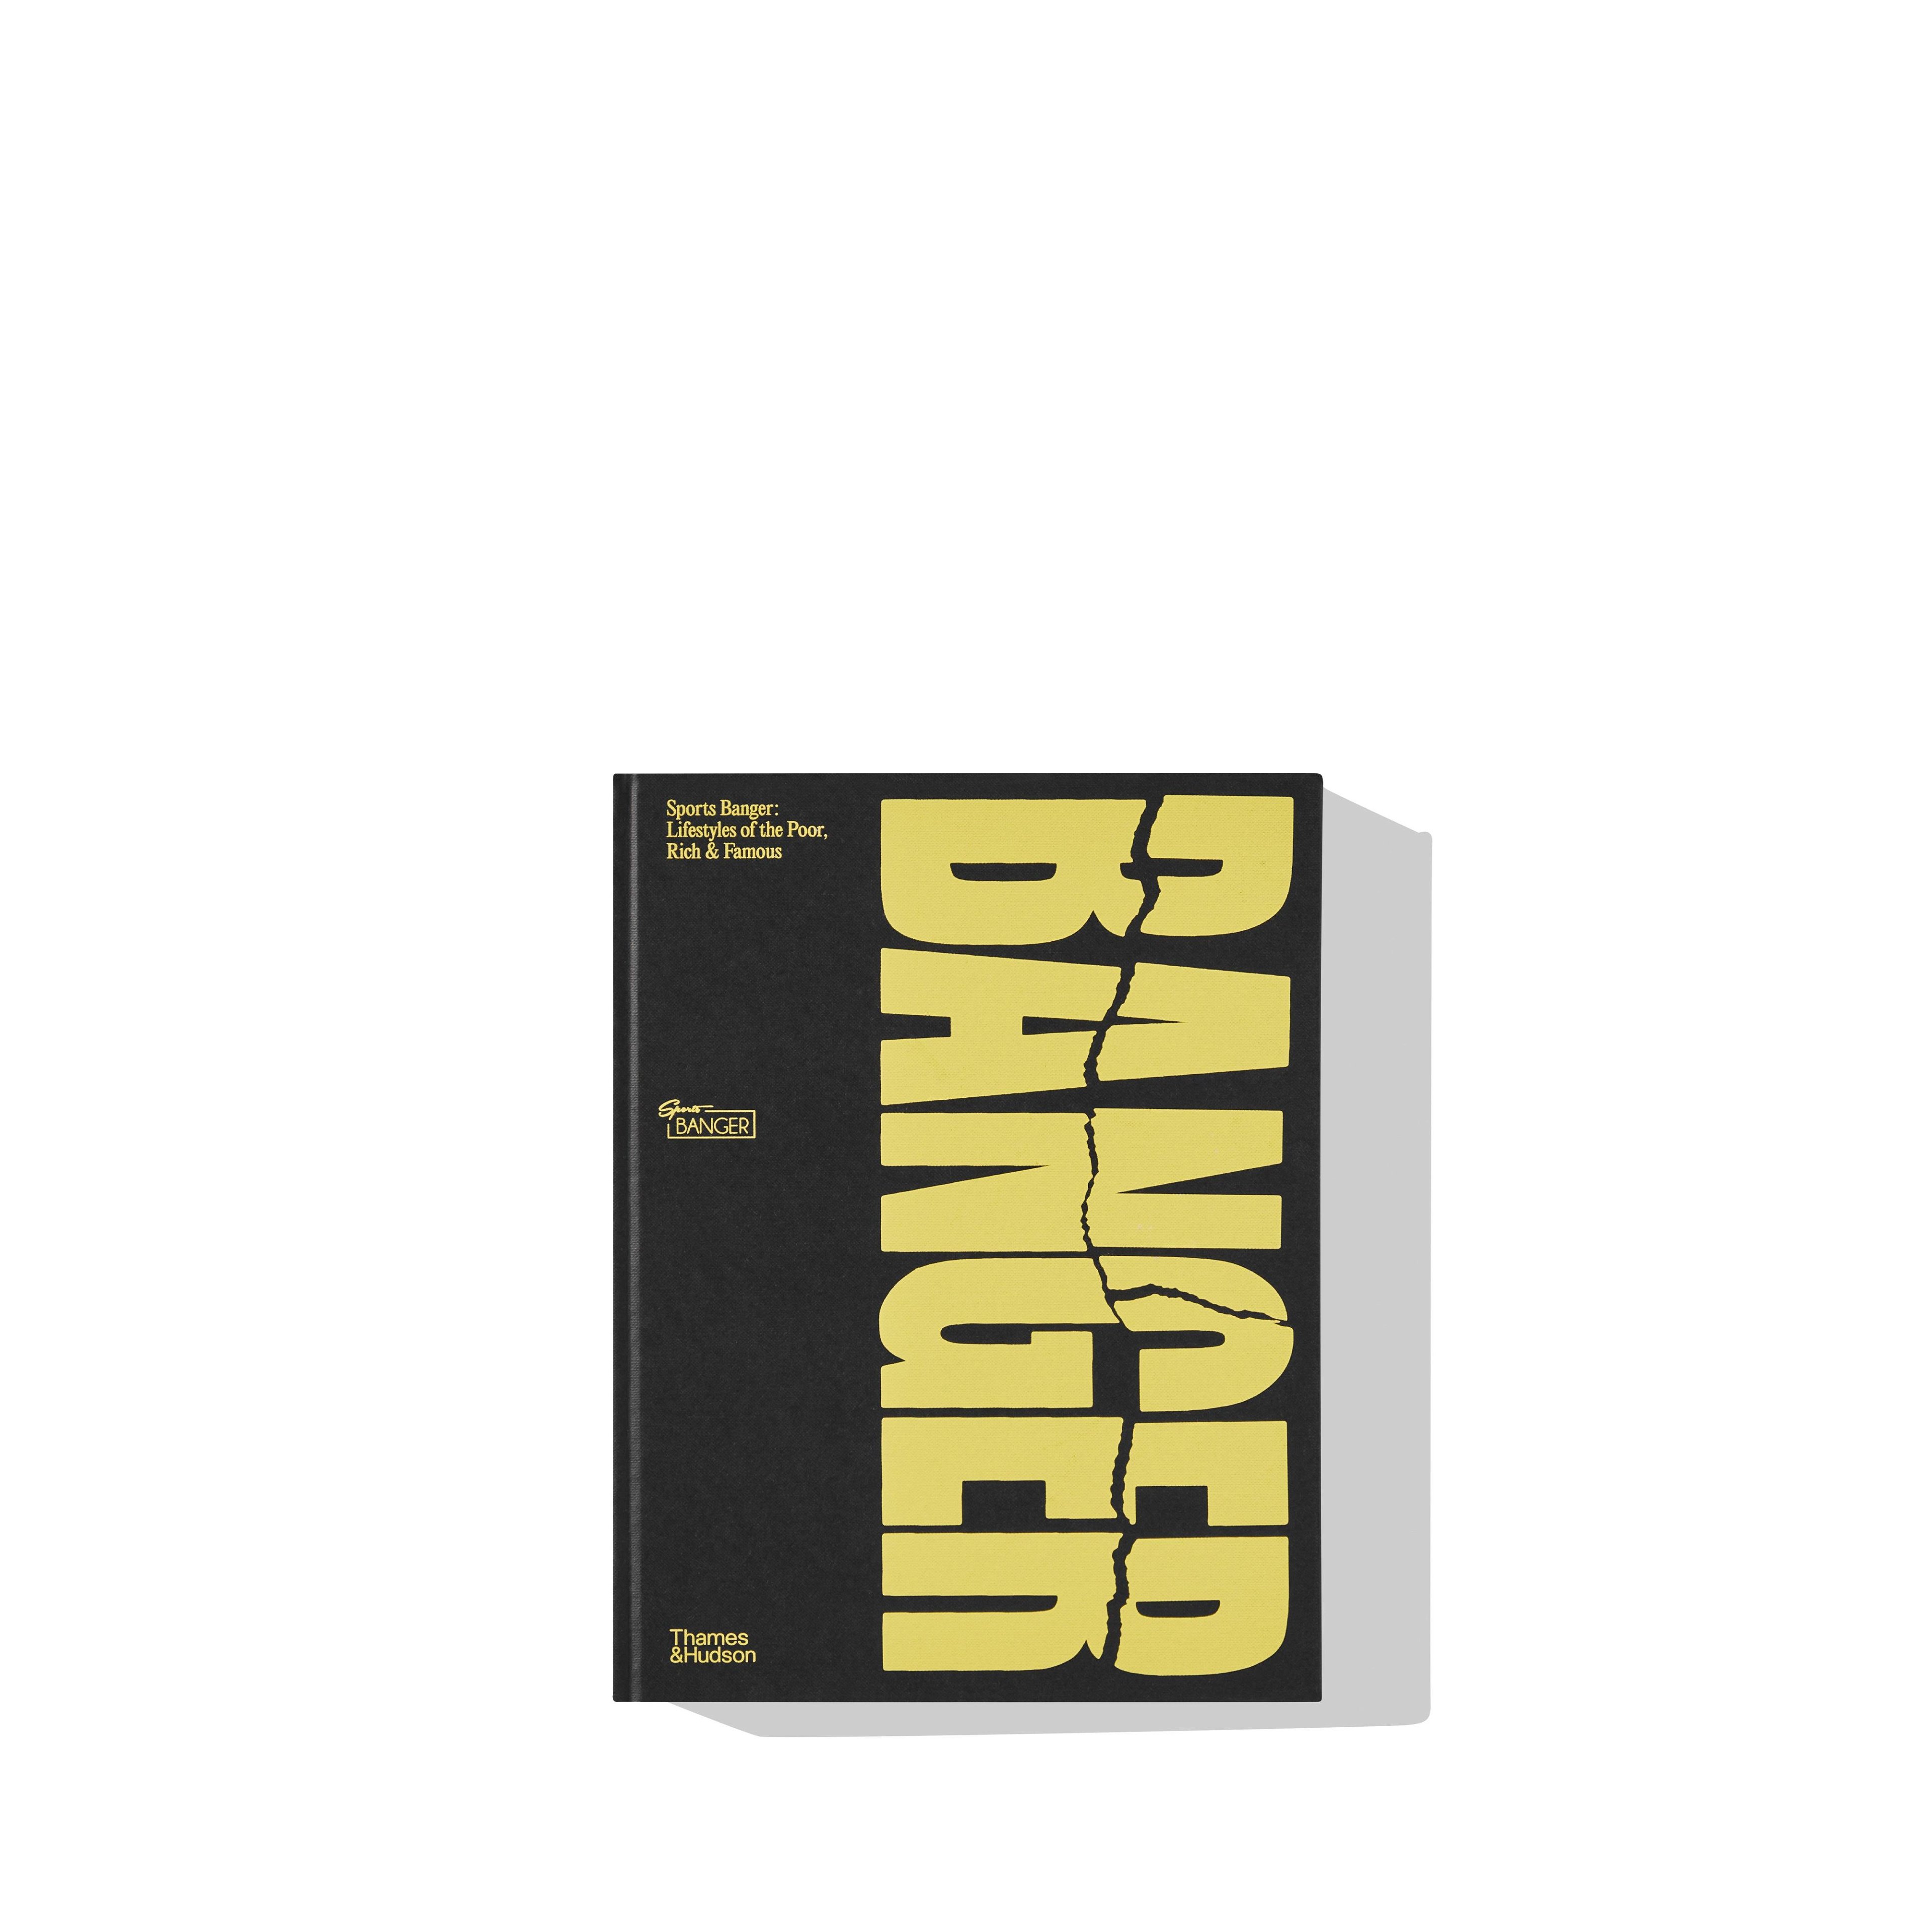 Sports Banger - Limited Edition 10th Anniversary Book - (Yellow) by SPORTS BANGER